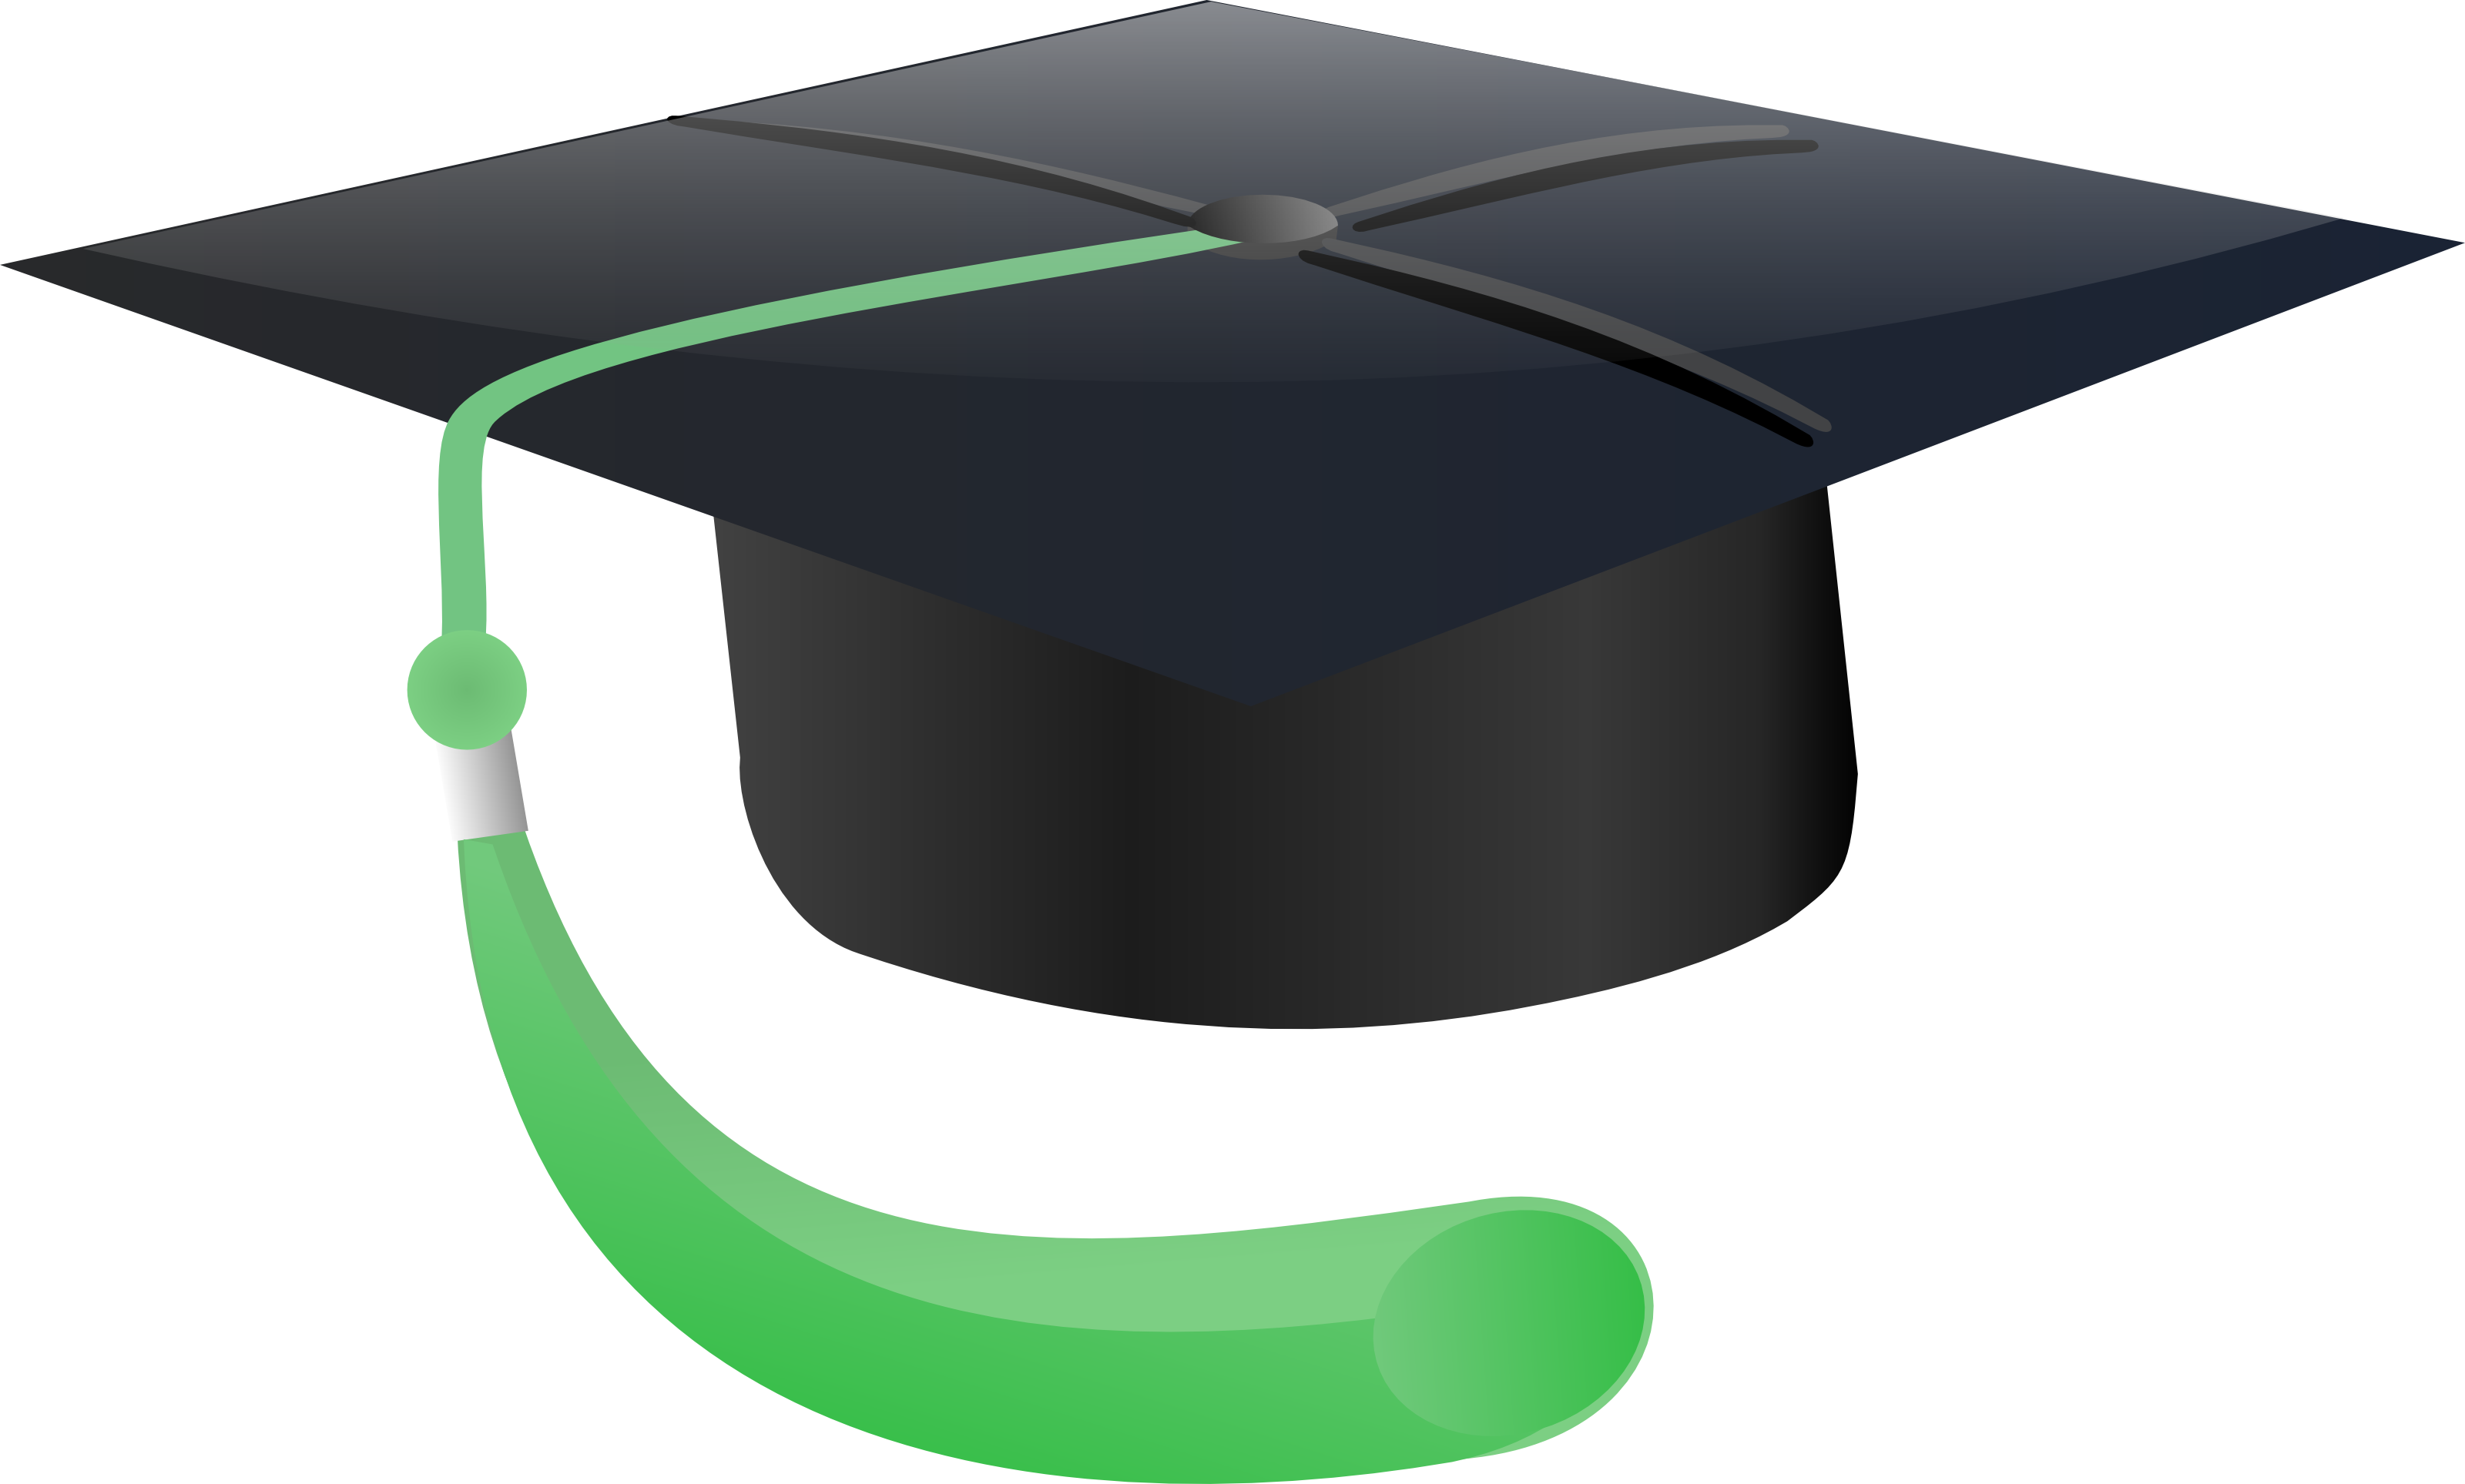 Download Free Graduation Cap With Green Tassle Clipart Illustration